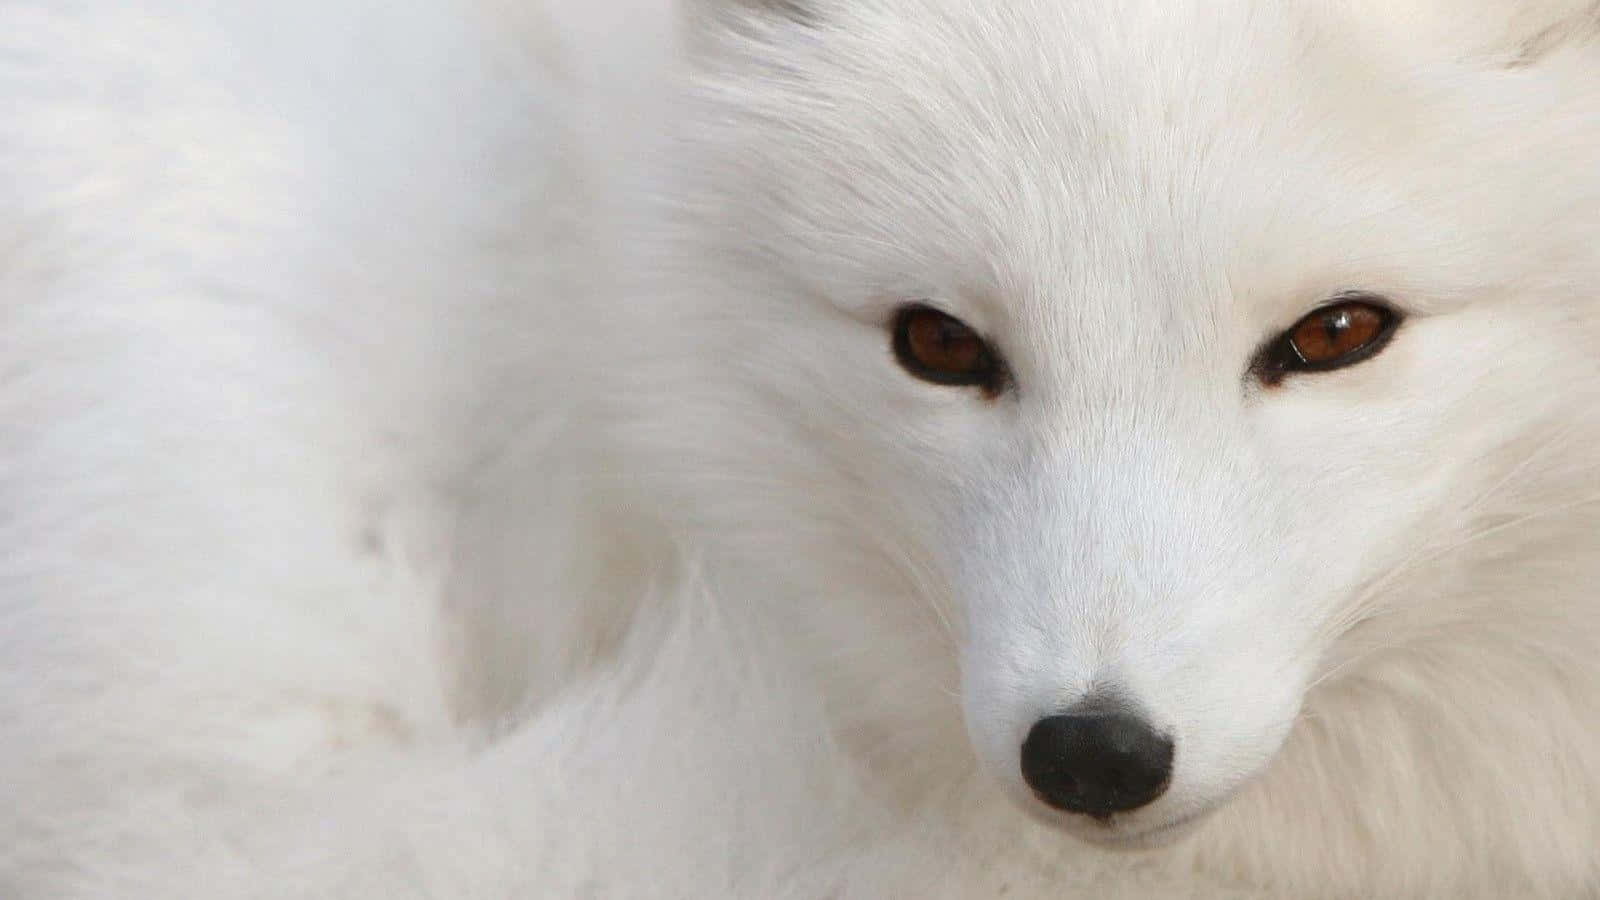 "The Arctic Fox Adapts to Extreme Weather Conditions"